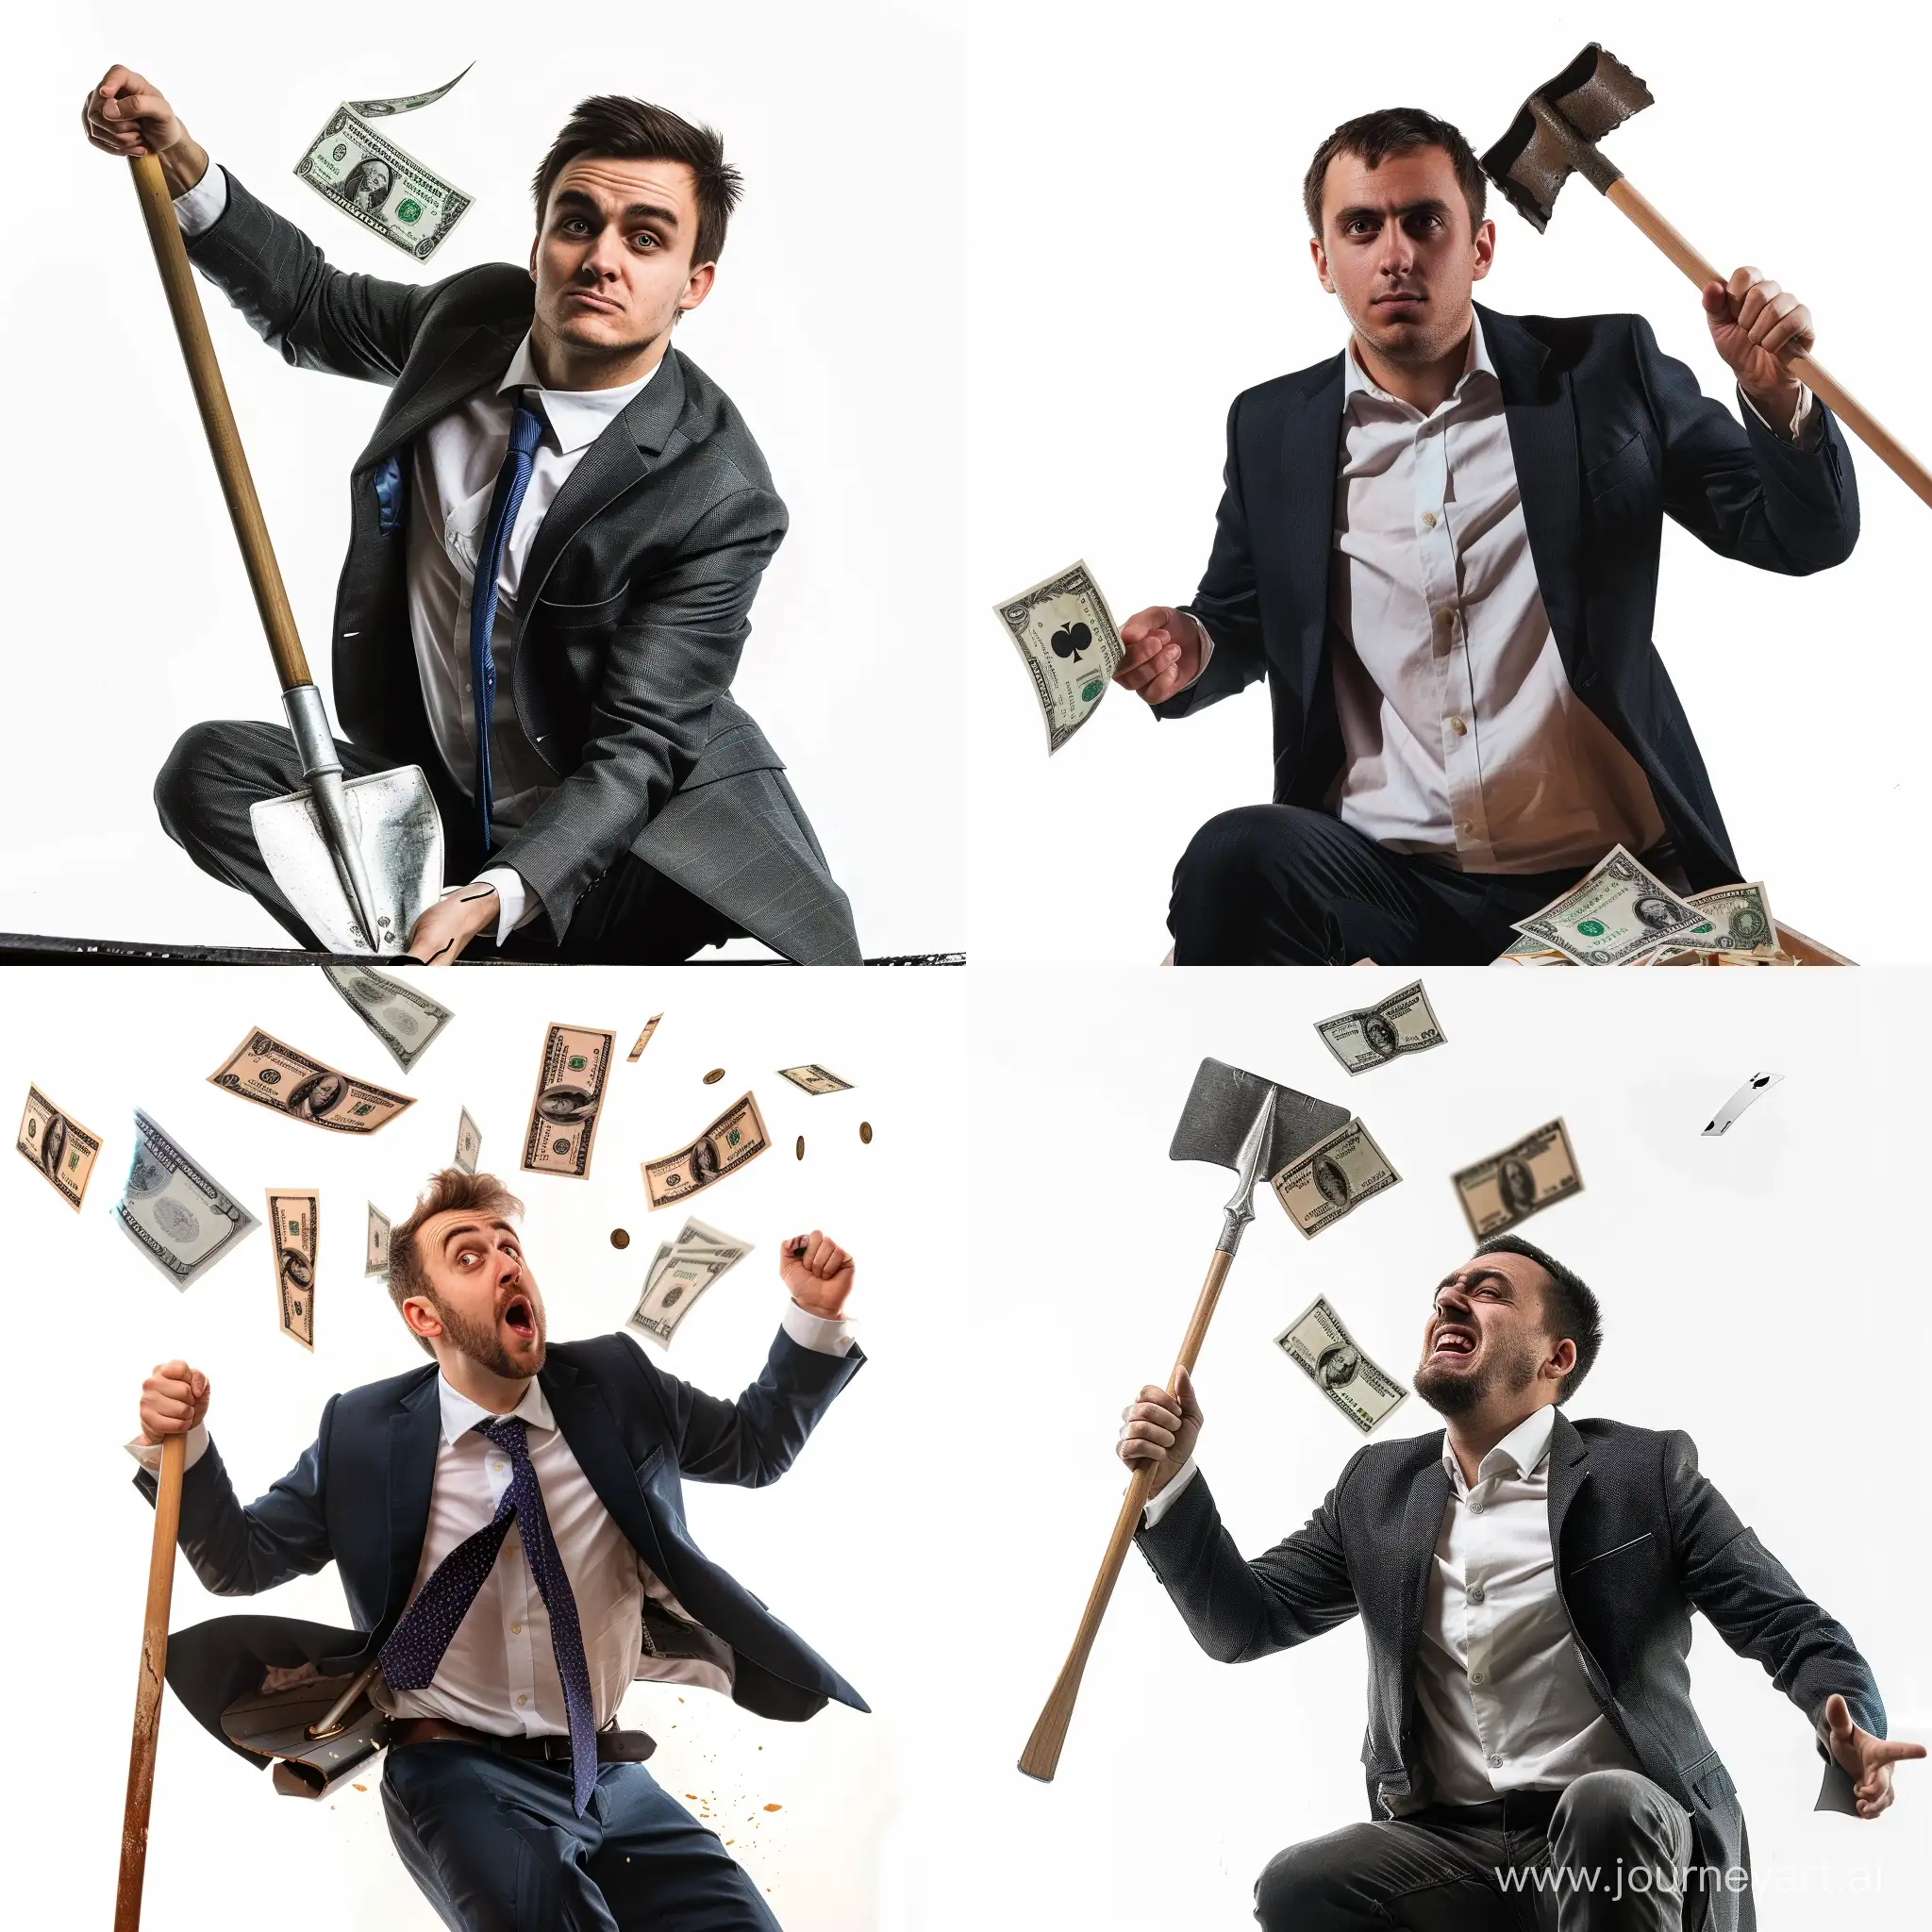 A man wearing a suit with a white background and holding a spade is rowing money